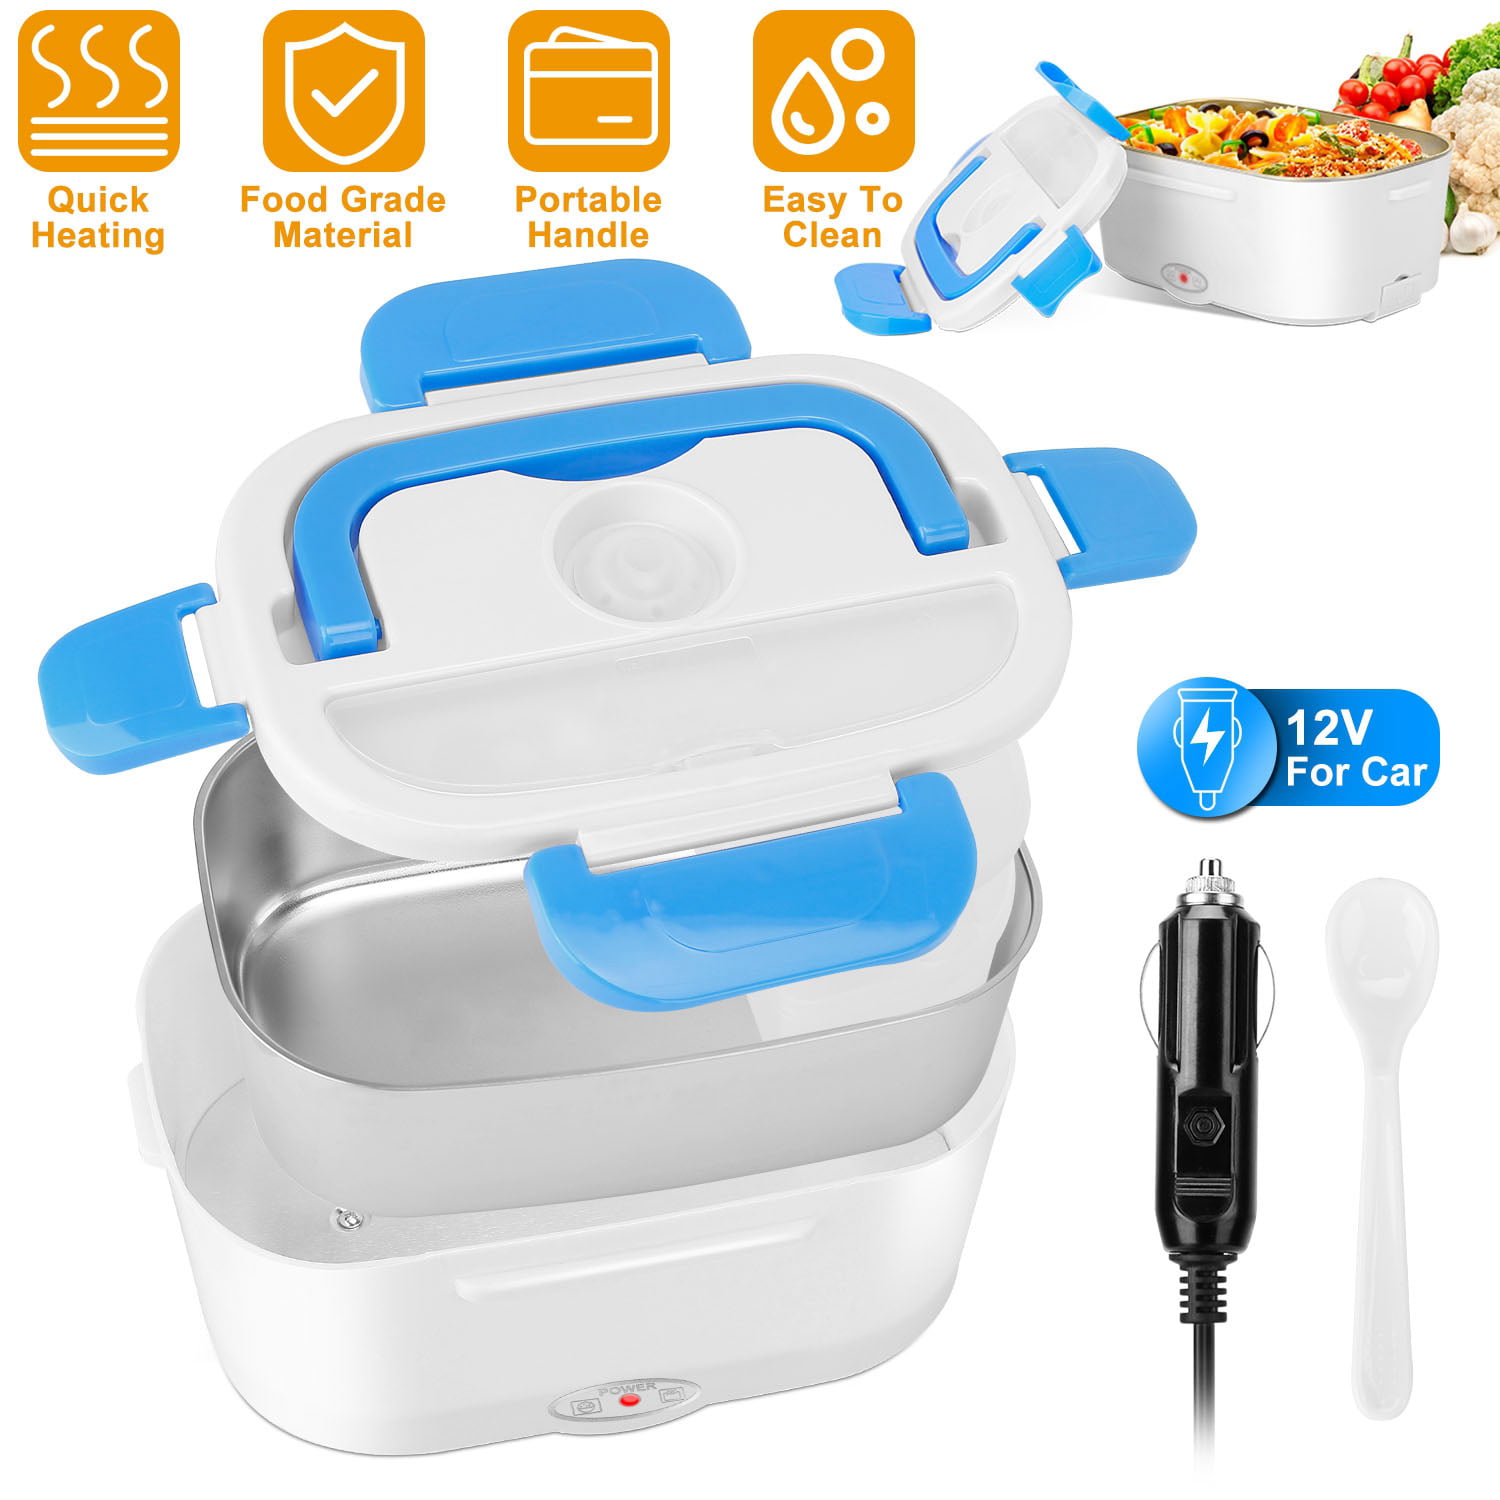 Details about   New Portable Electric Lunch Box Food Warmer Car Heater Container Heating Storage 